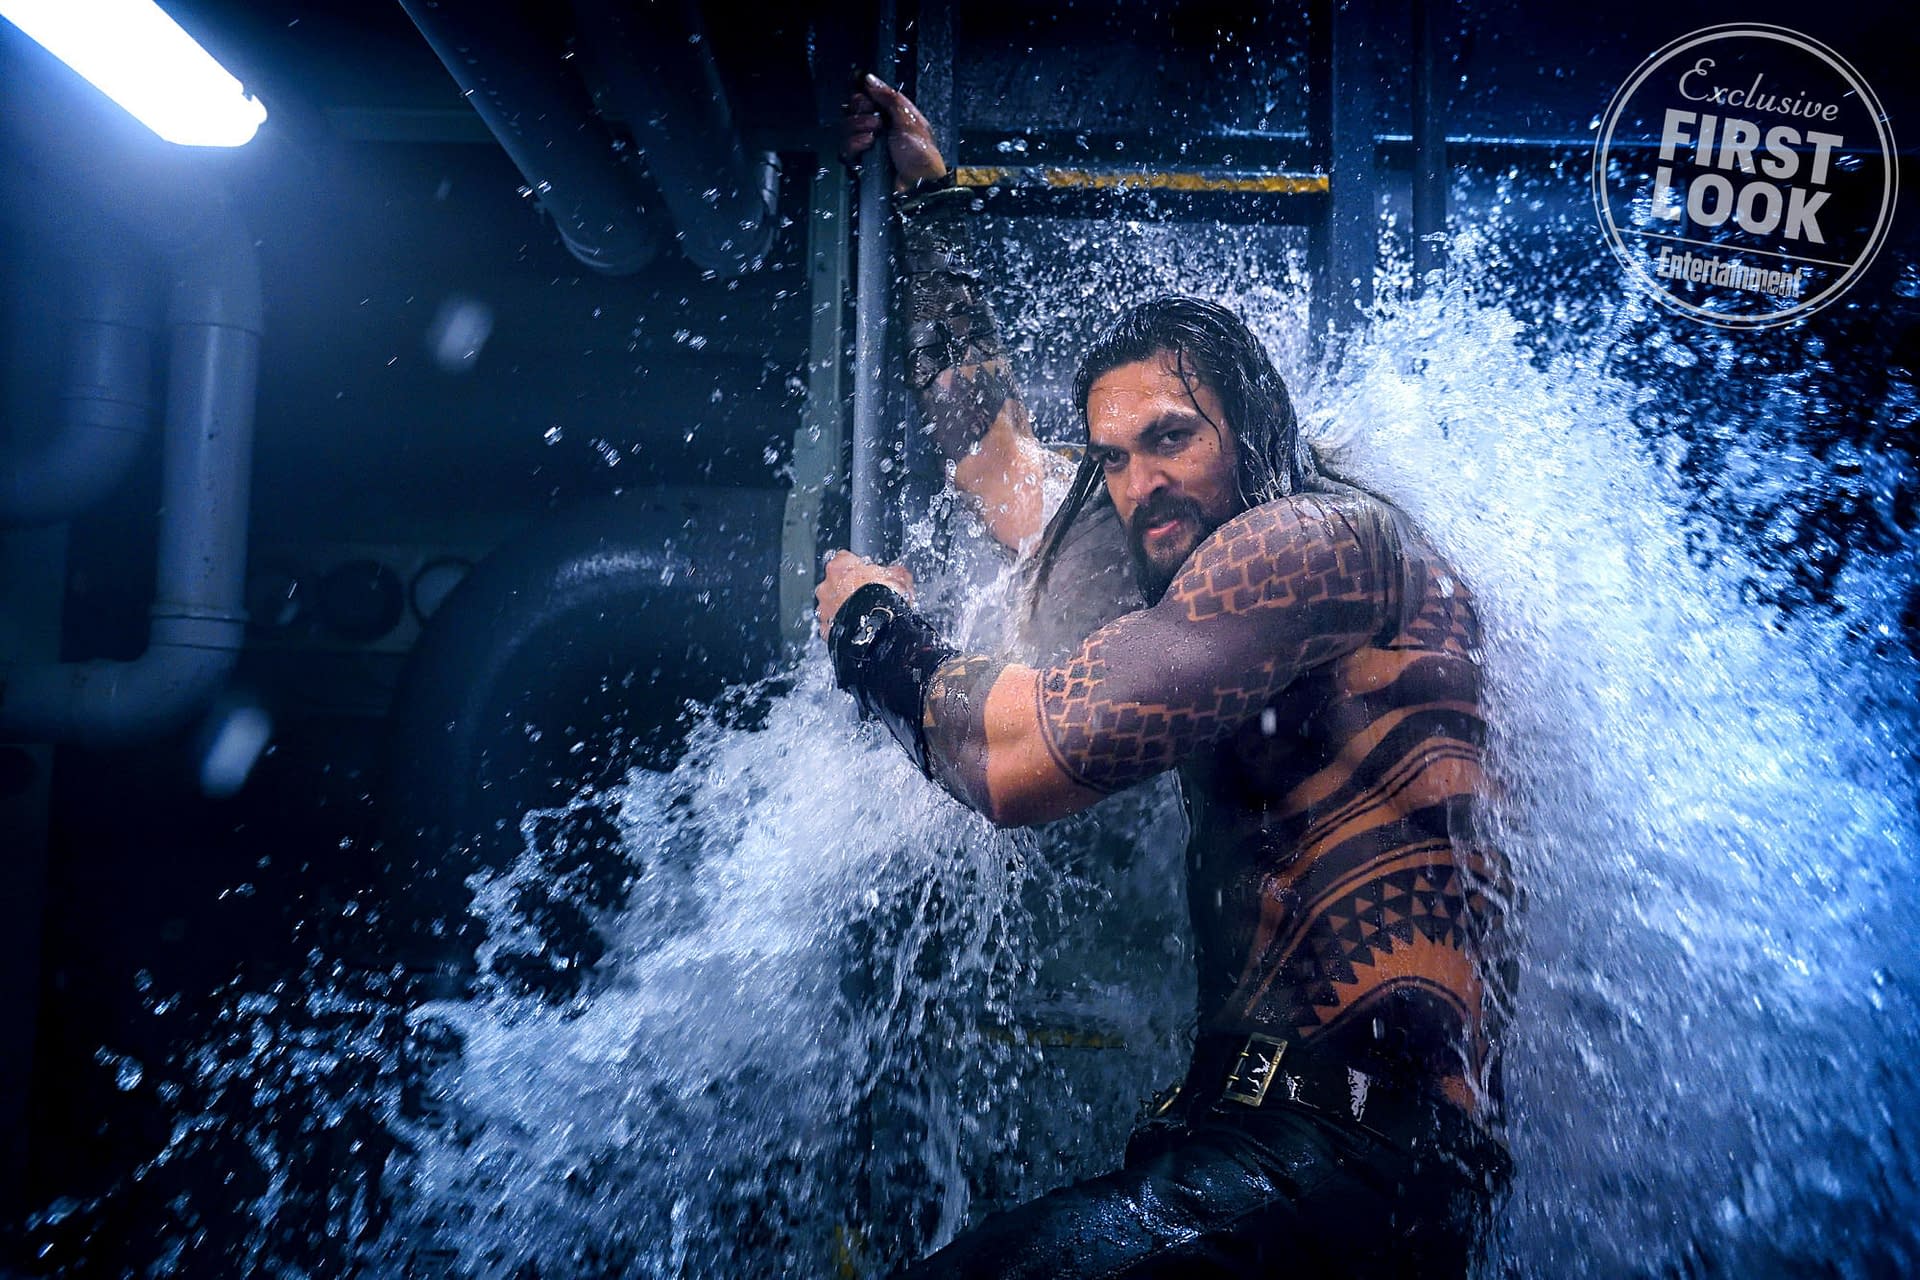 James Wan Had a Request for the Producers of Justice League Concerning Aquaman